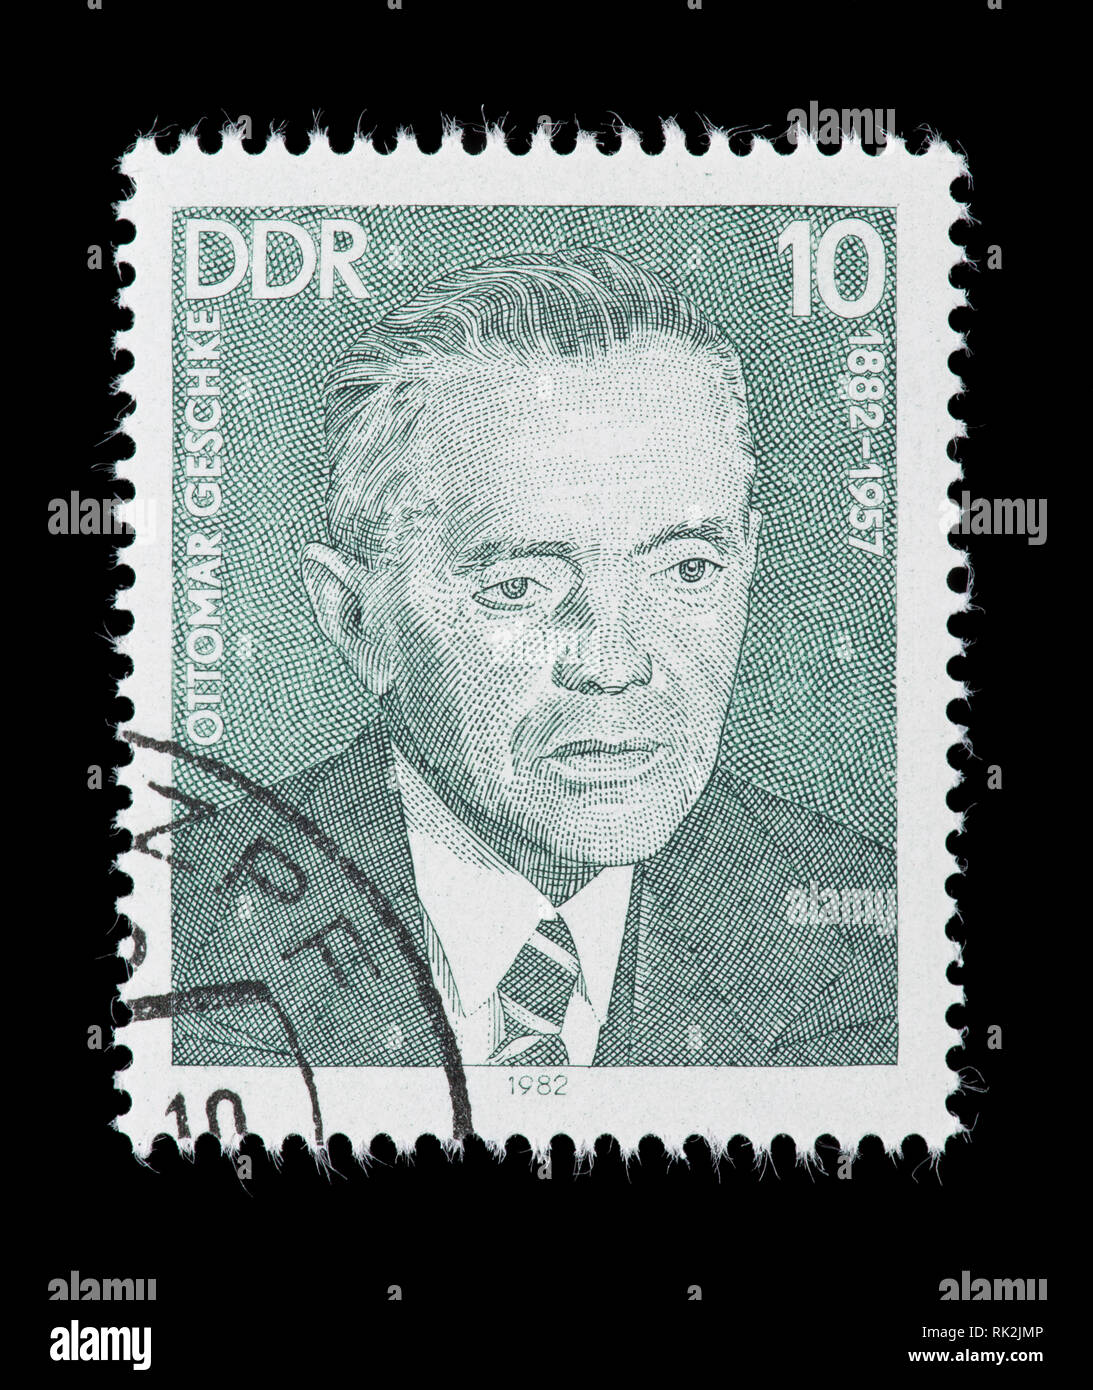 Postage stamp from East Germany (DDR) depicting Ottomar Geschke, German politician Stock Photo